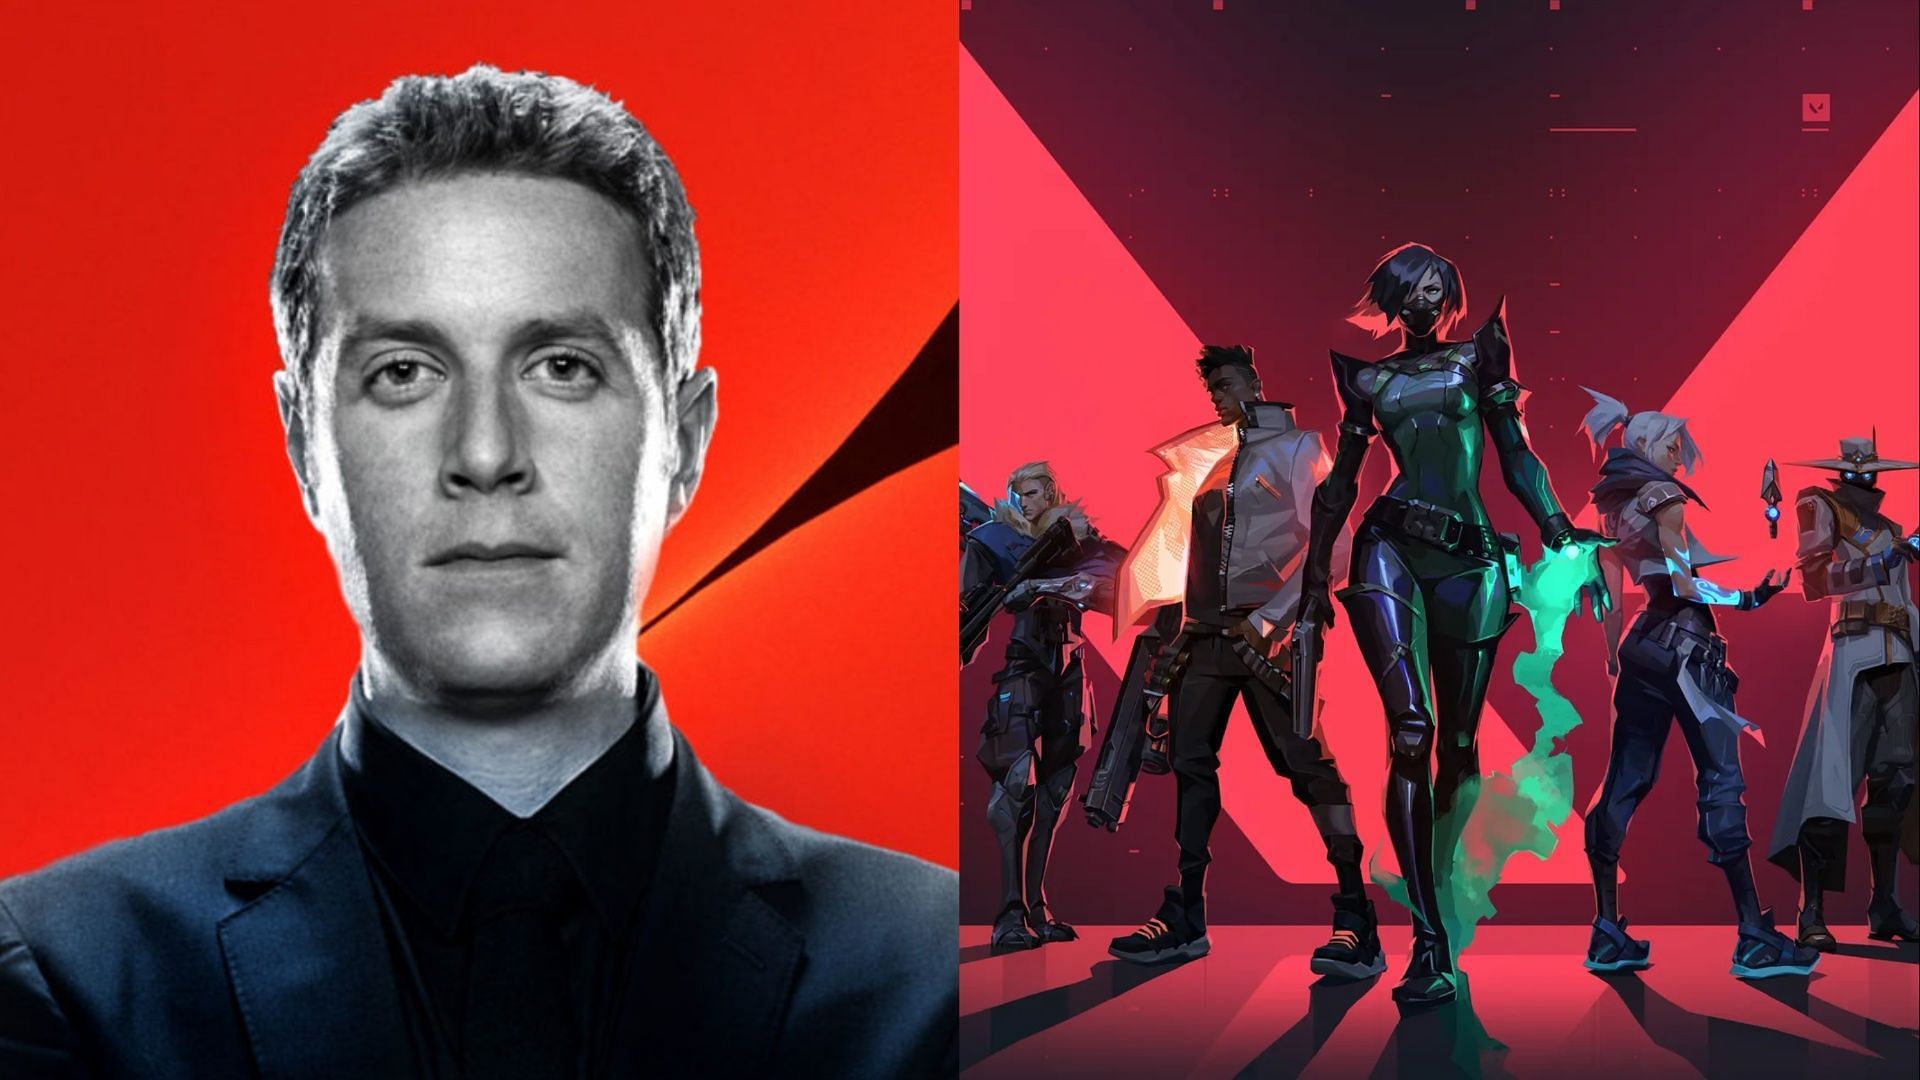 The Game Awards 2023: Dota 2 will compete for the title in two categories  at once